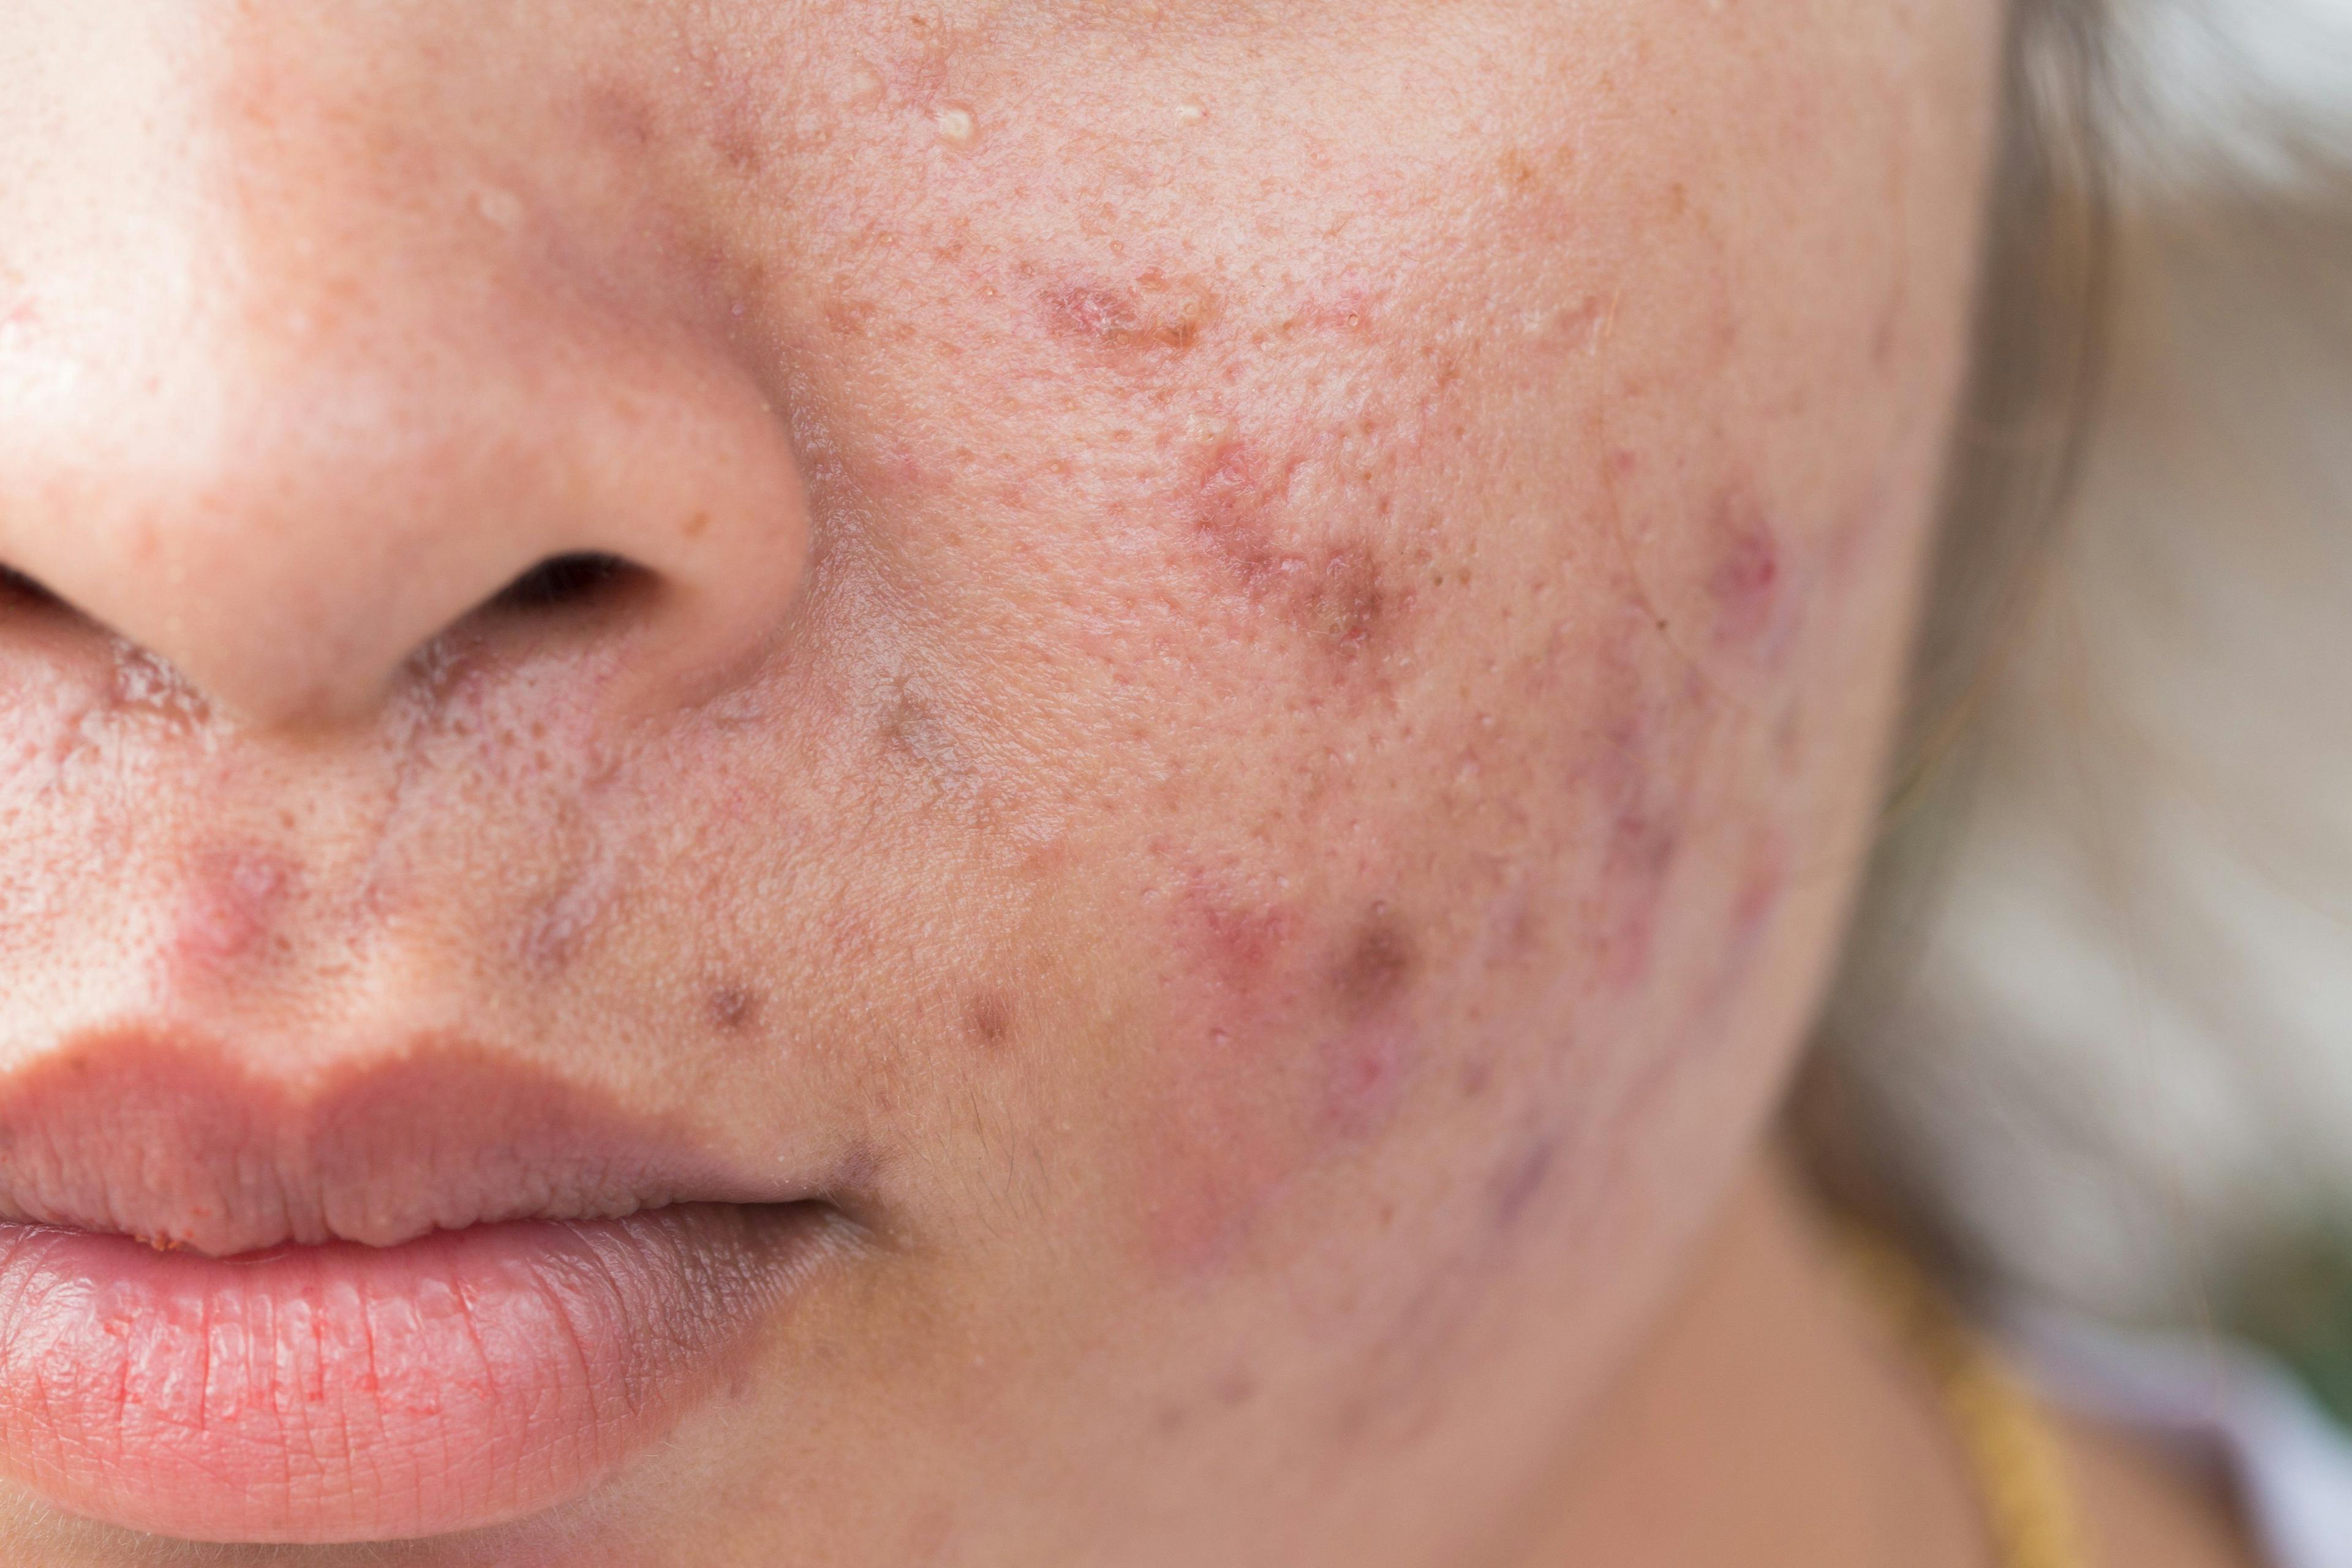 Treatment options for acne expand